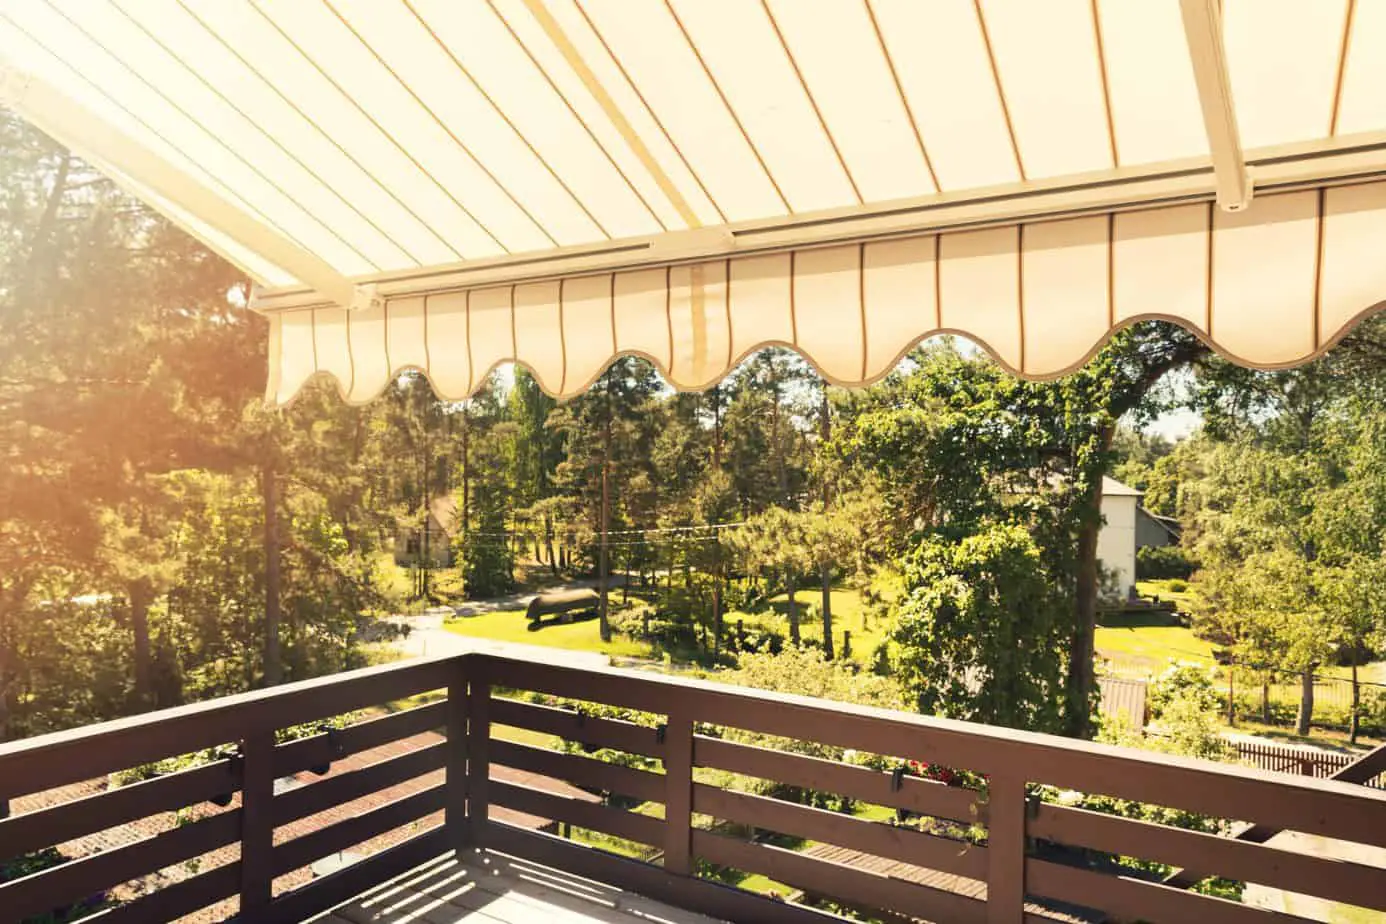 Best Retractable Awning - Budget Friendly to Buy